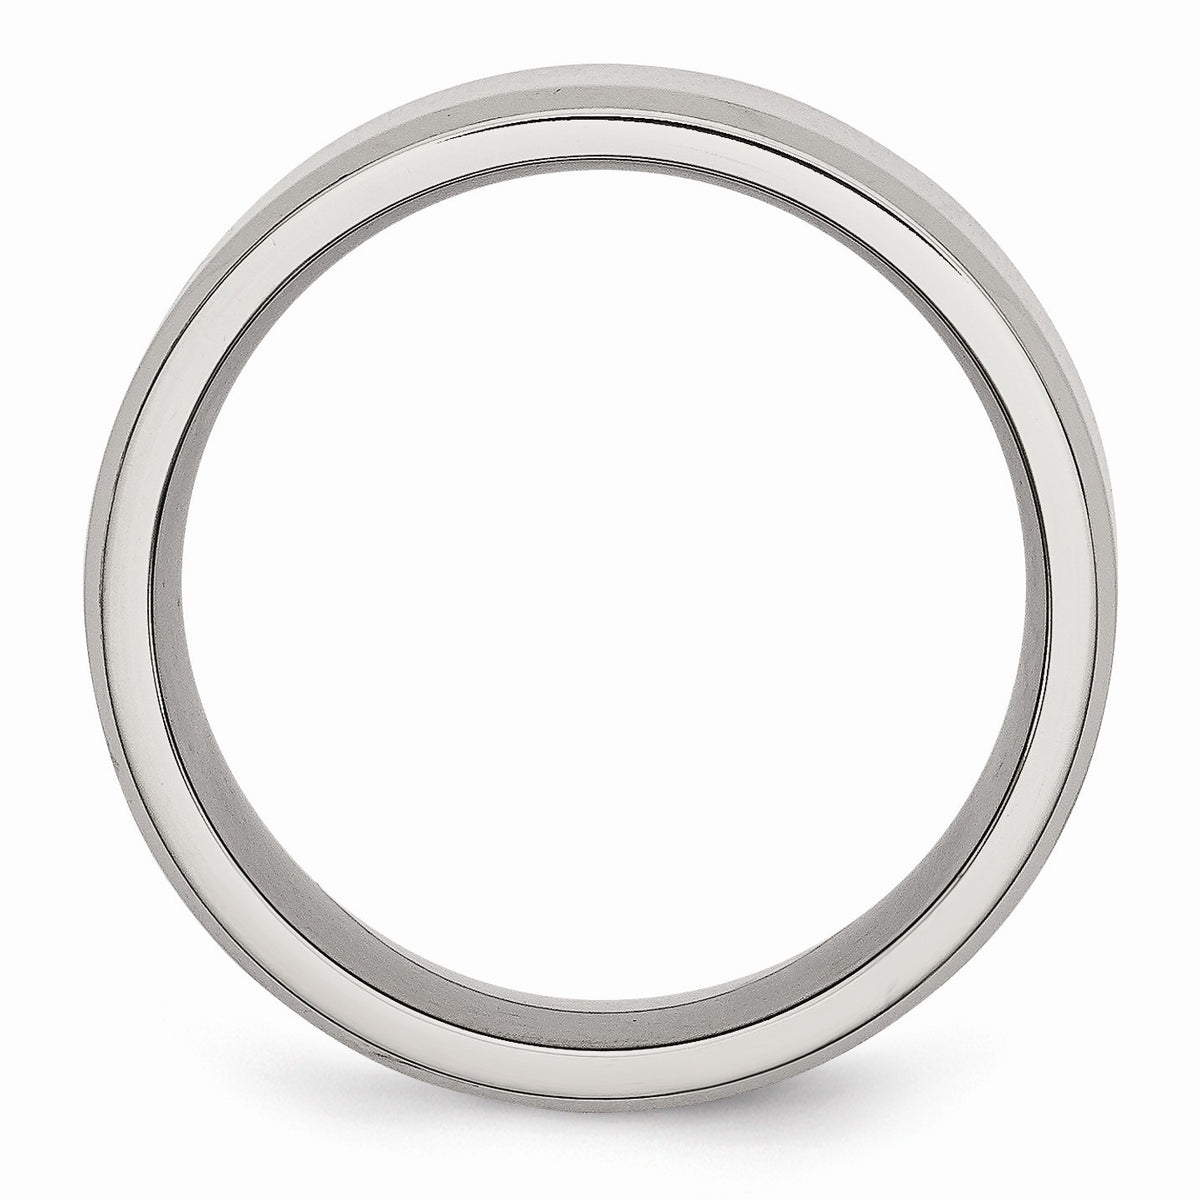 Alternate view of the 8mm Polished Beveled Edge Comfort Fit Stainless Steel Band by The Black Bow Jewelry Co.